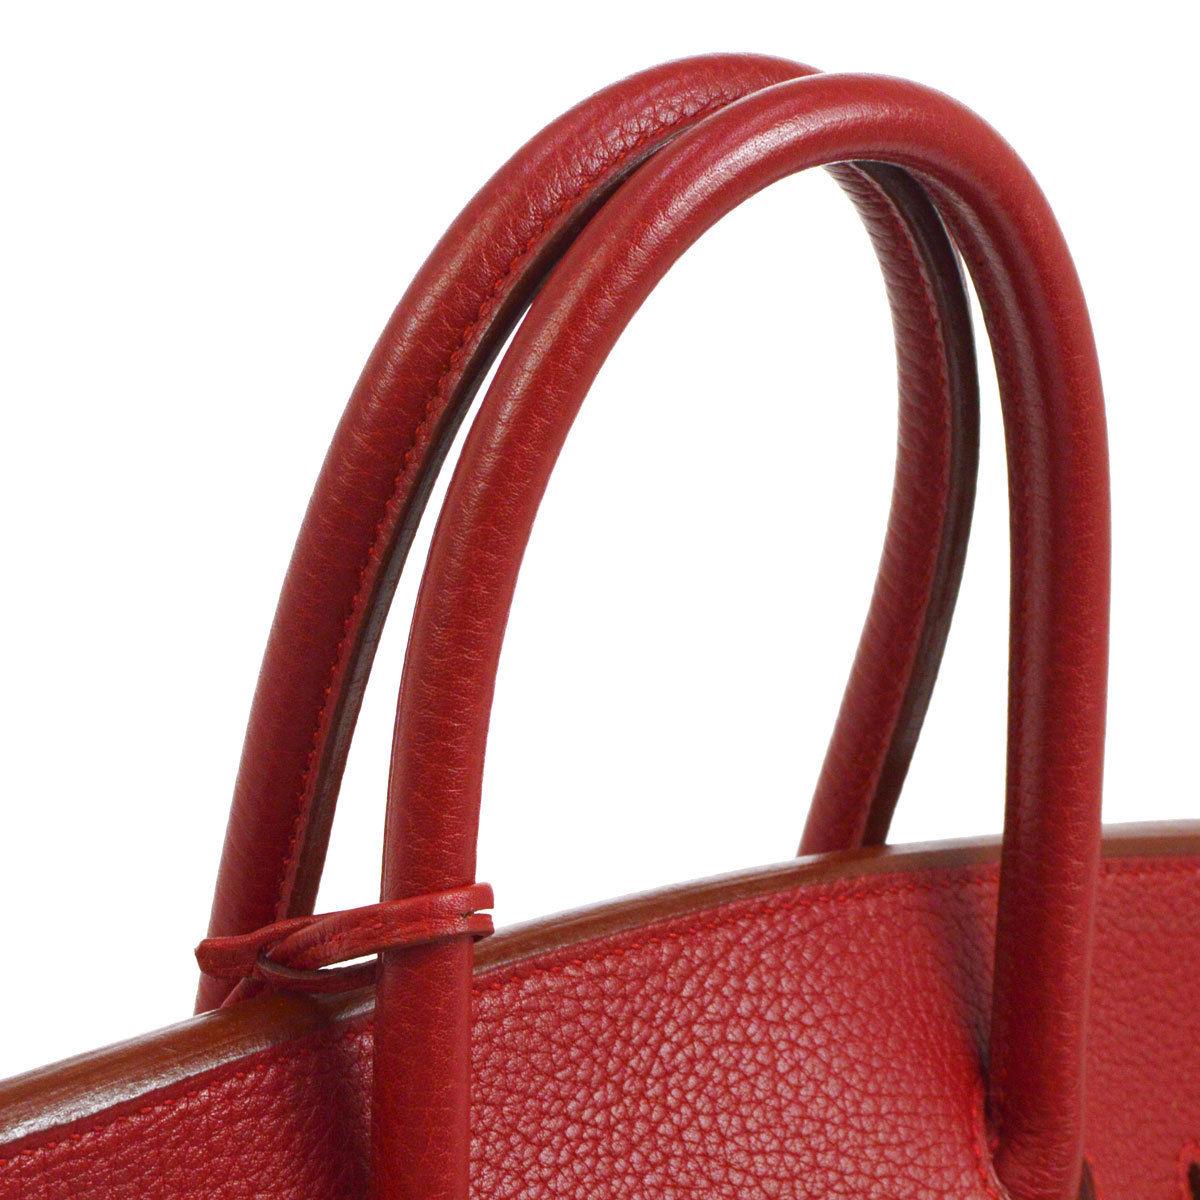 Hermes Birkin 35 Red Leather Gold Top Handle Satchel Travel Tote Bag

Leather
Gold tone hardware
Leather lining
Date code present
Made in France
Handle drop 4